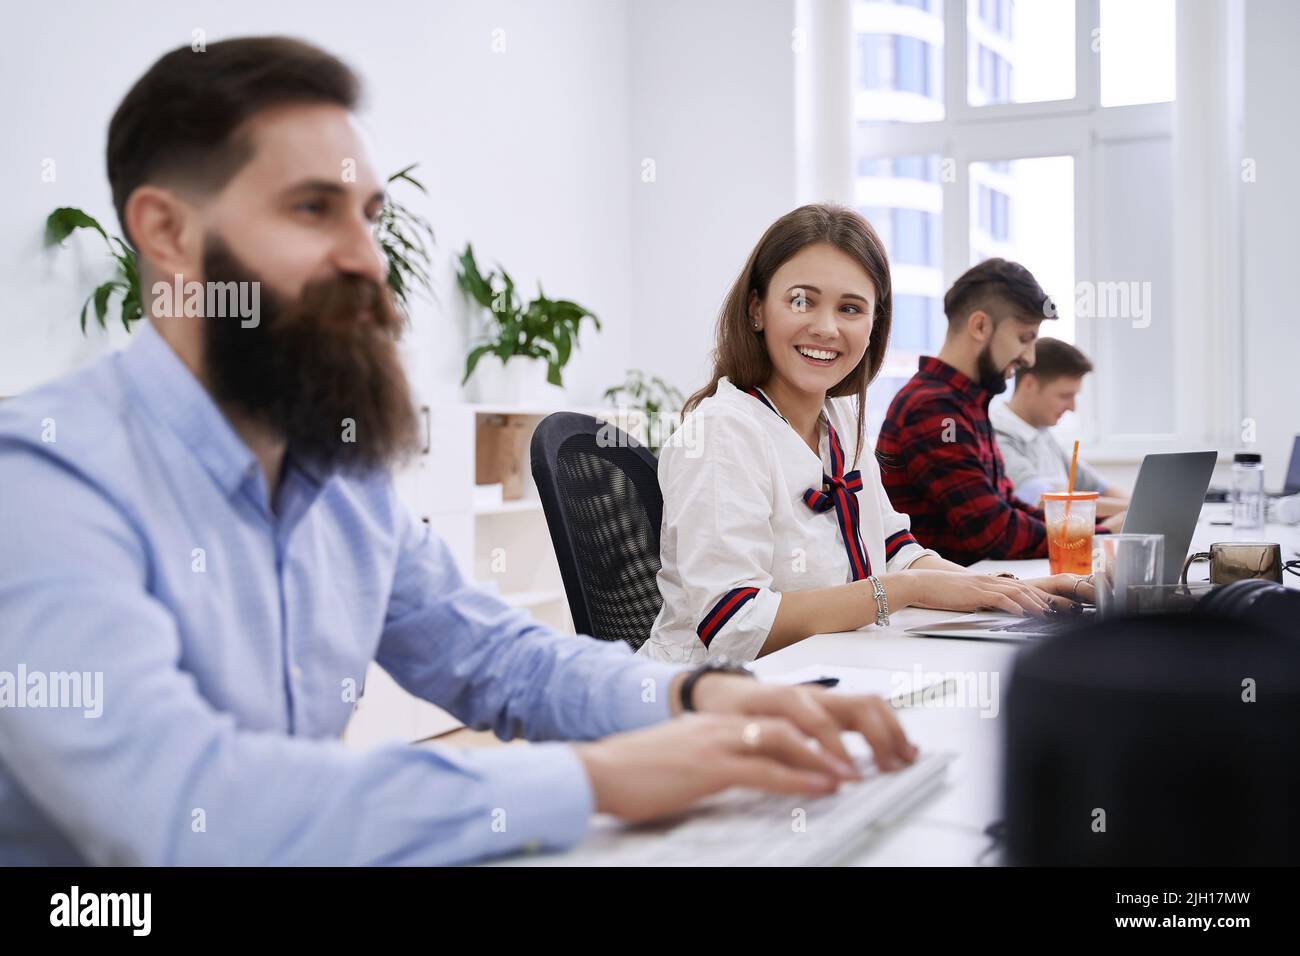 People communicating and working in modern IT office. Group of young and experienced programmers and software developers sitting at desks working on Stock Photo